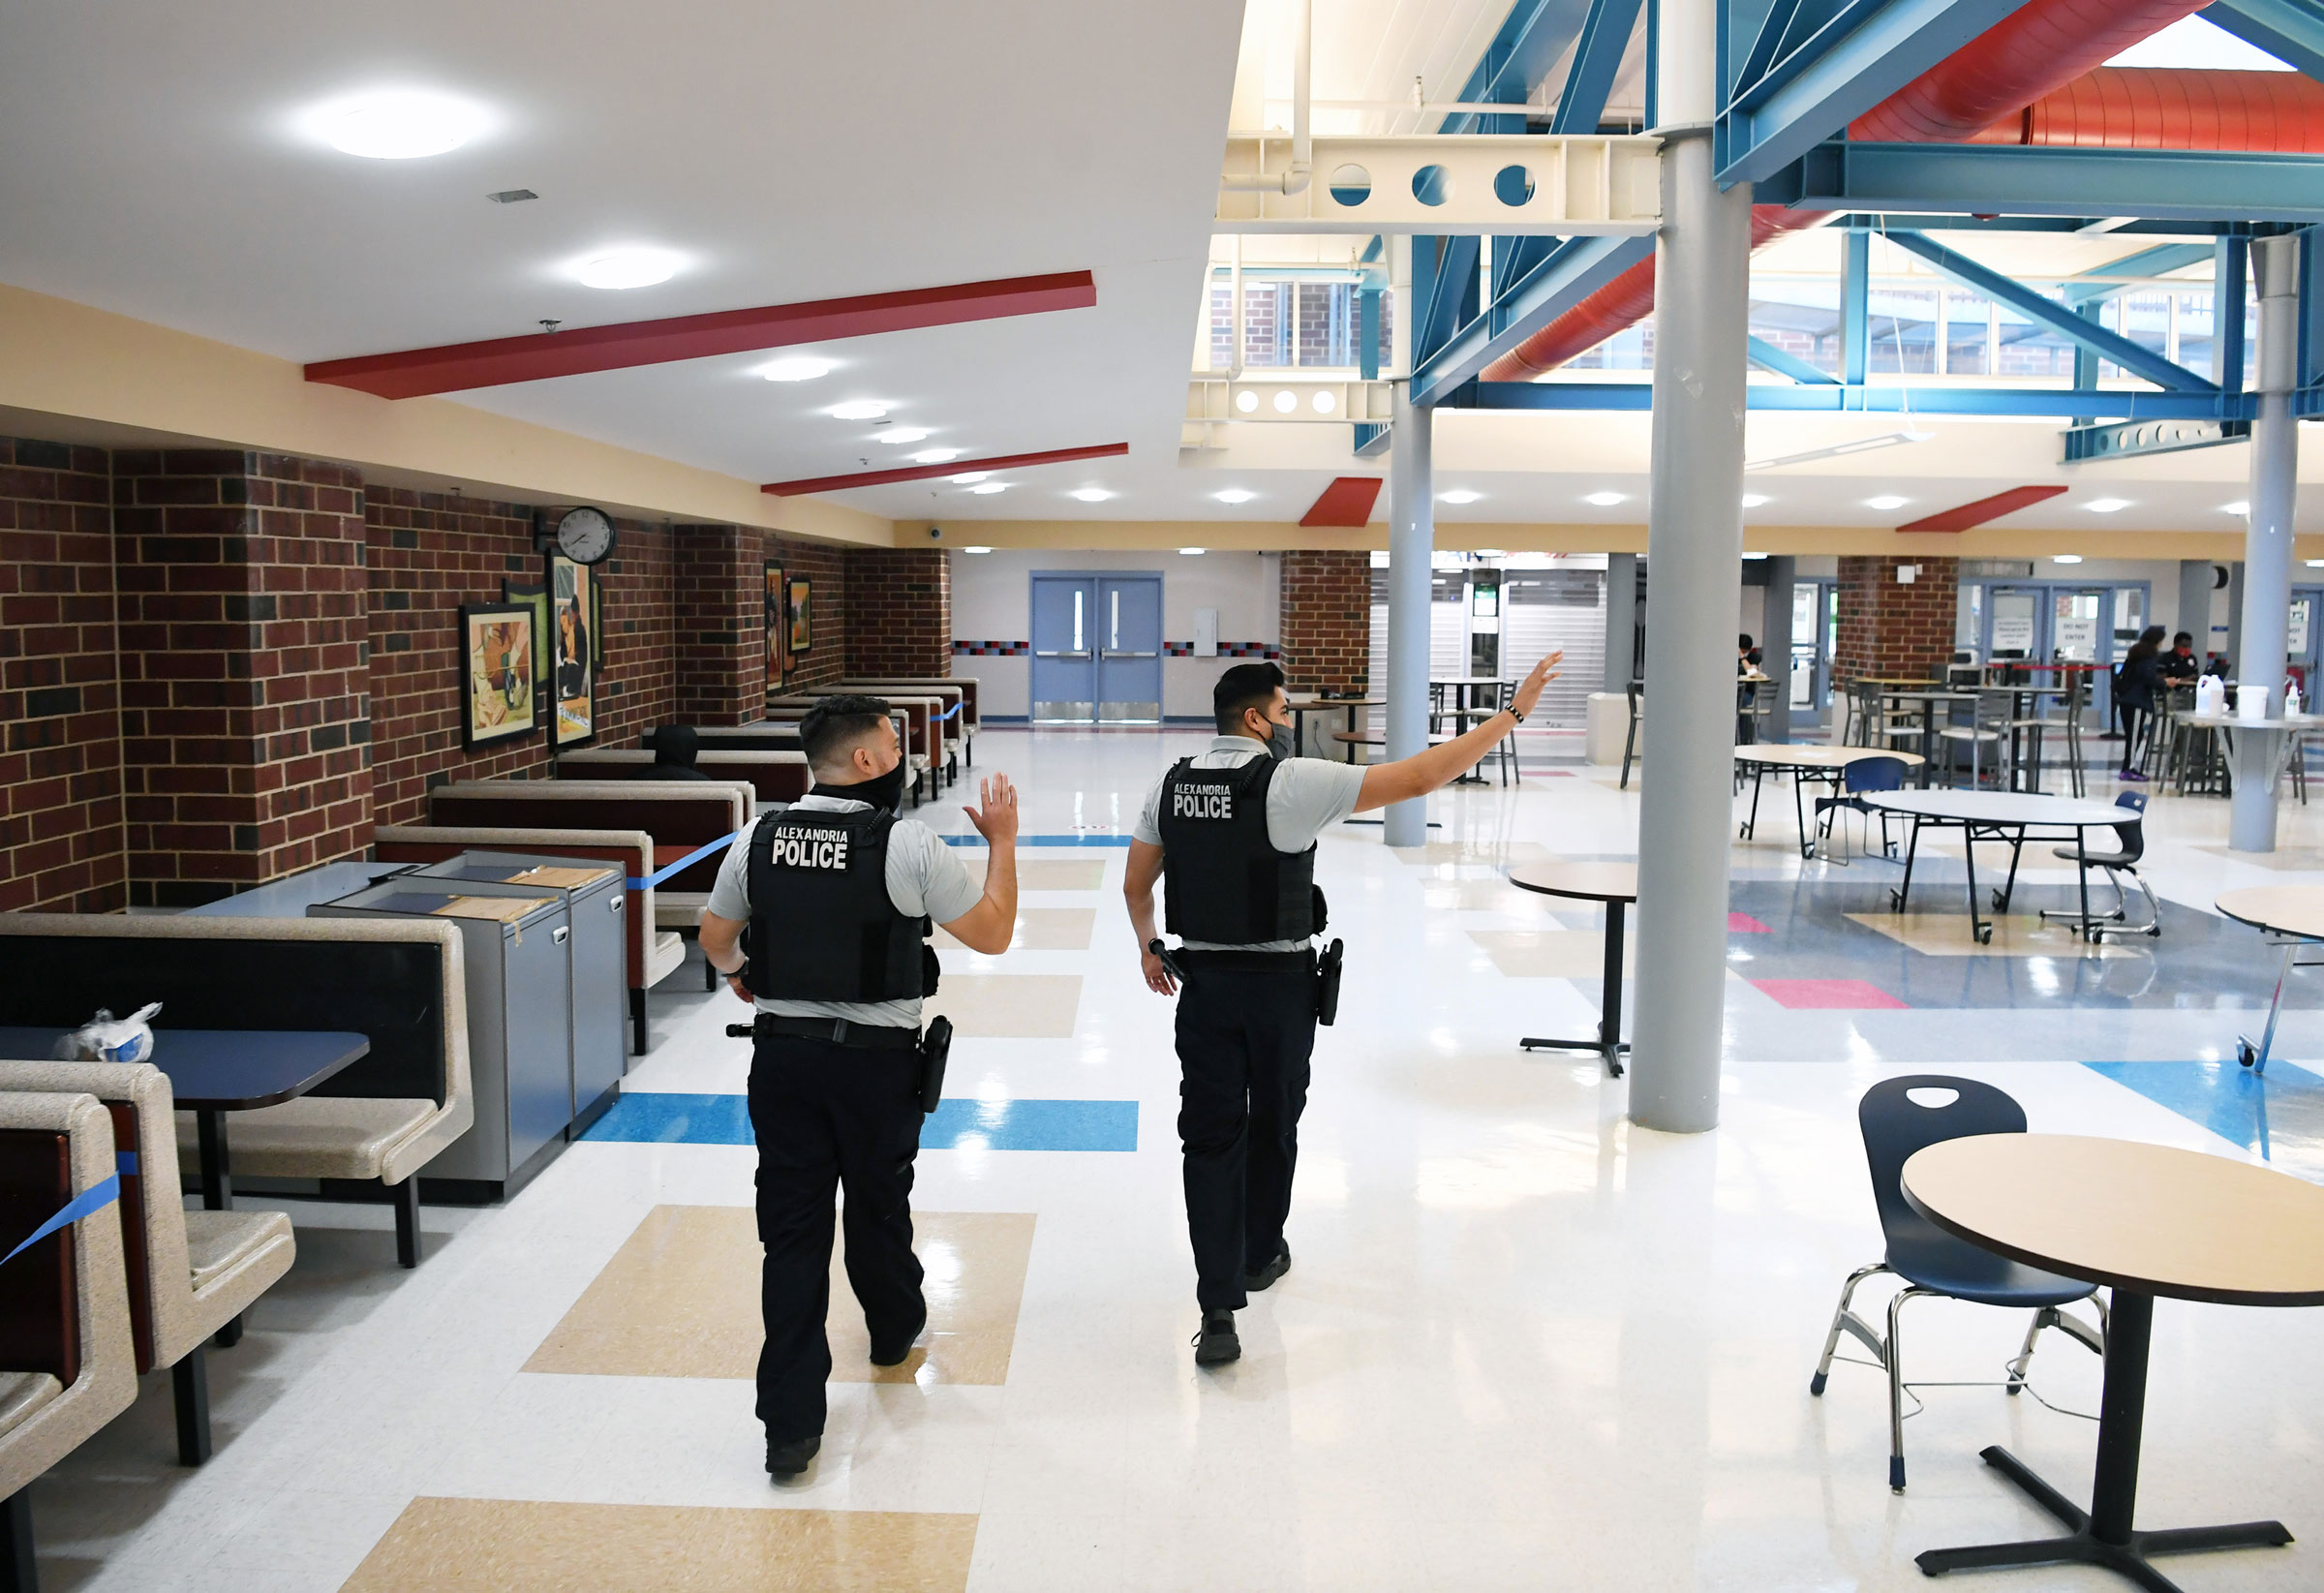 Alexandria Police Department school resource officers, Gary Argueta, left, and Johnny Larios, right, wave to students as they walk through the cafeteria at T.C. Williams High School in Alexandria, Va., on June 9, 2021. (Matt McClain—The Washington Post/Getty Images)